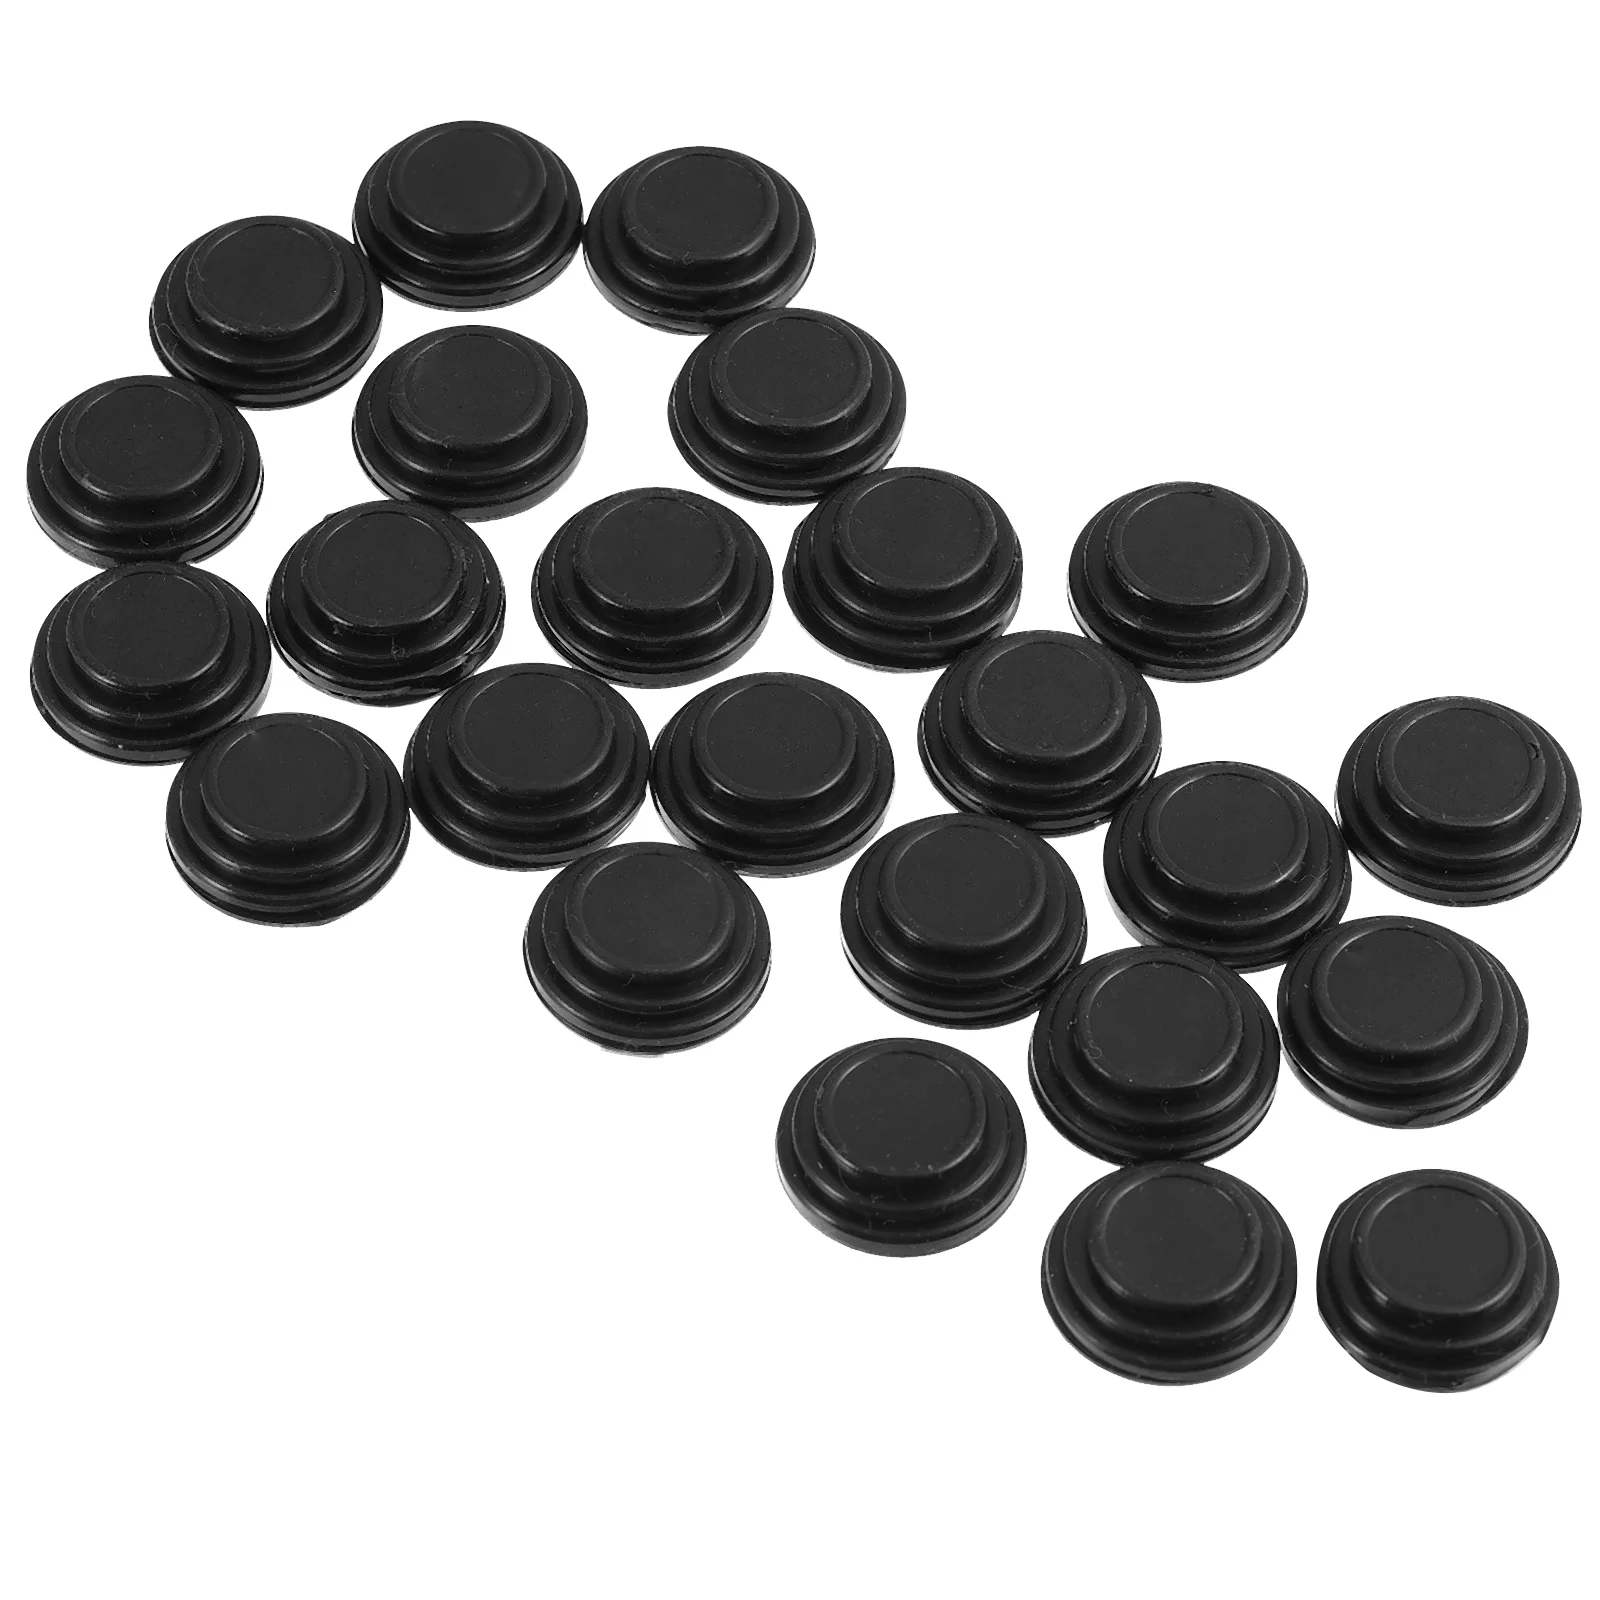 

24 Pcs Shock Absorbing Gasket Seal Stickers Soundproof Pads Anti-collision Silica Gel Protecting Car Scratch-Resistant